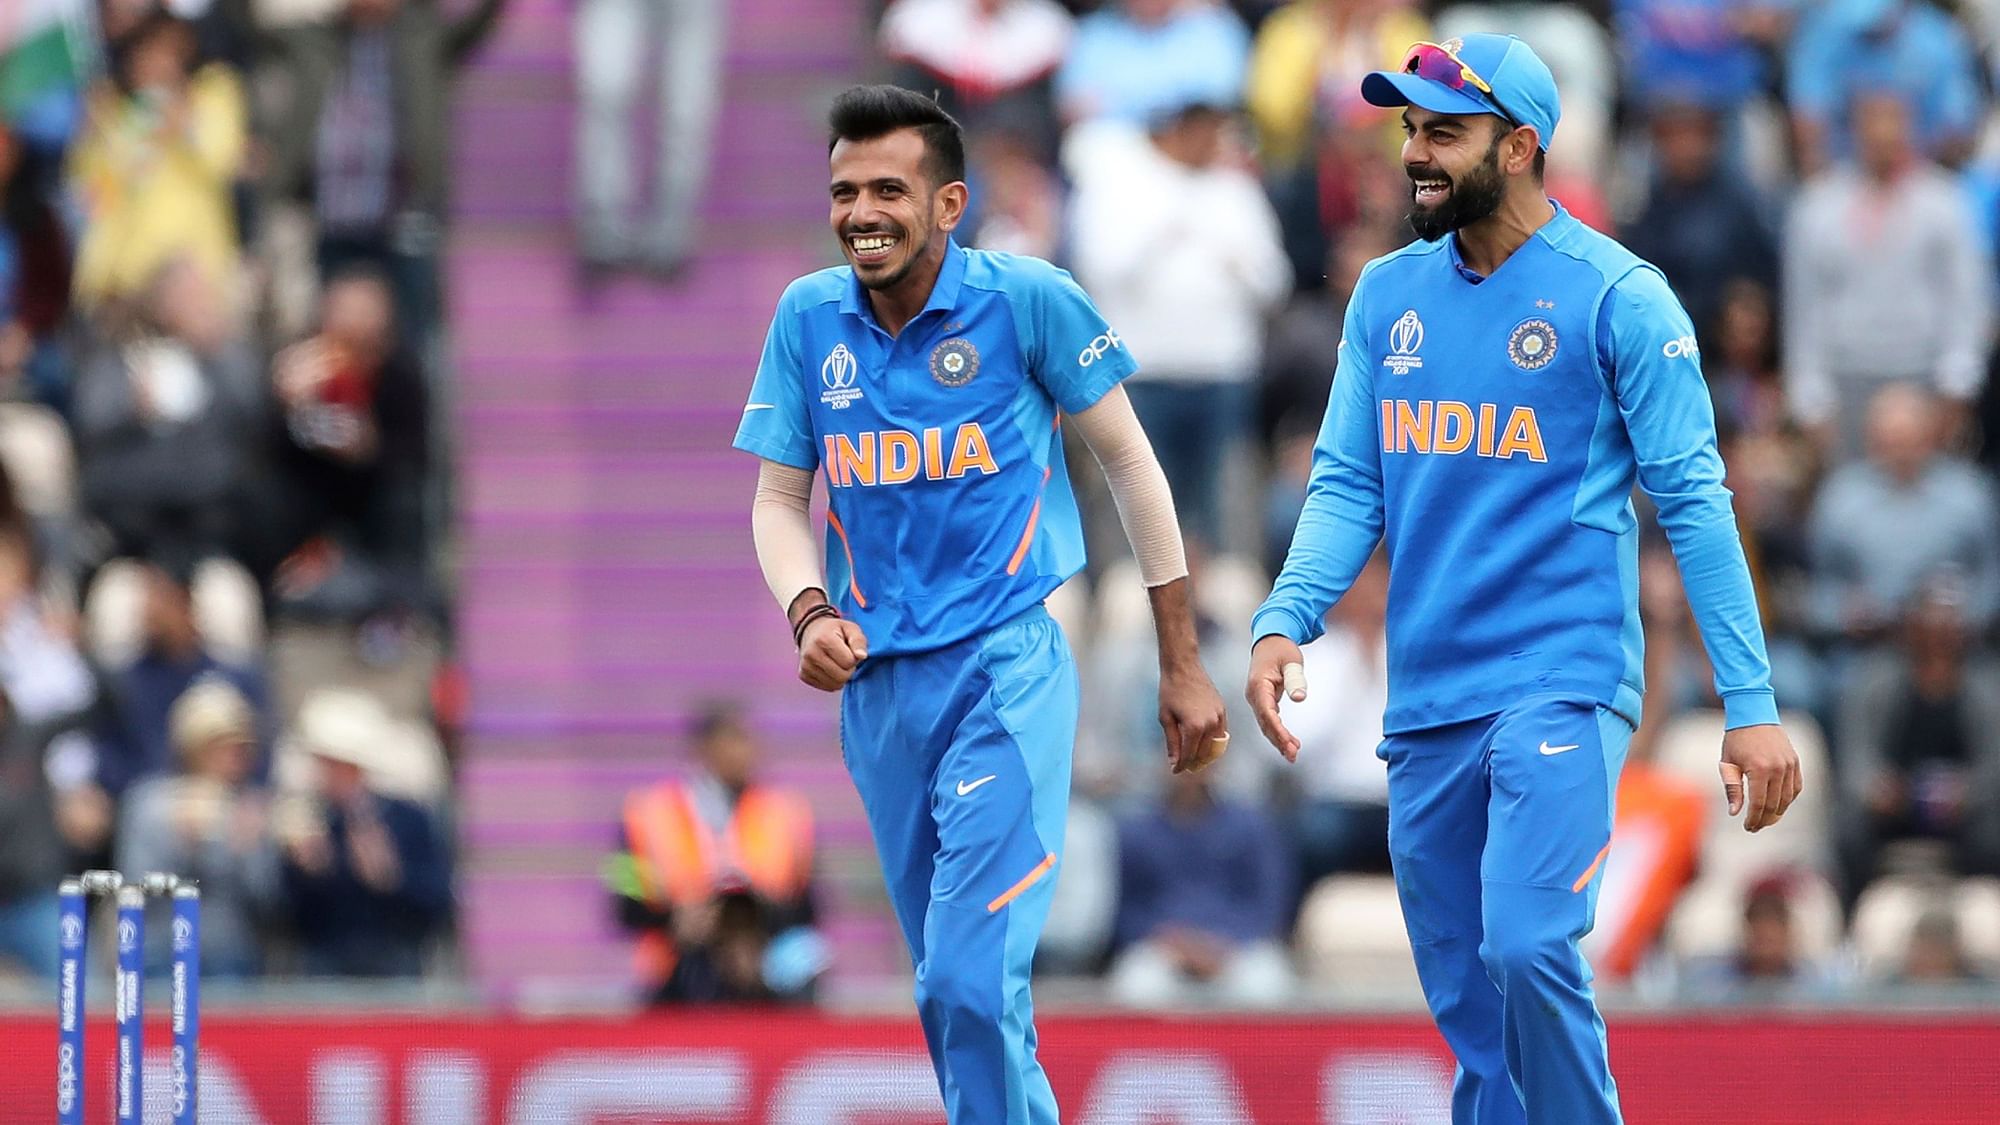 Yuzvendra Chahal in action against South Africa in India’s first match of ICC World Cup 2019 in Southampton.